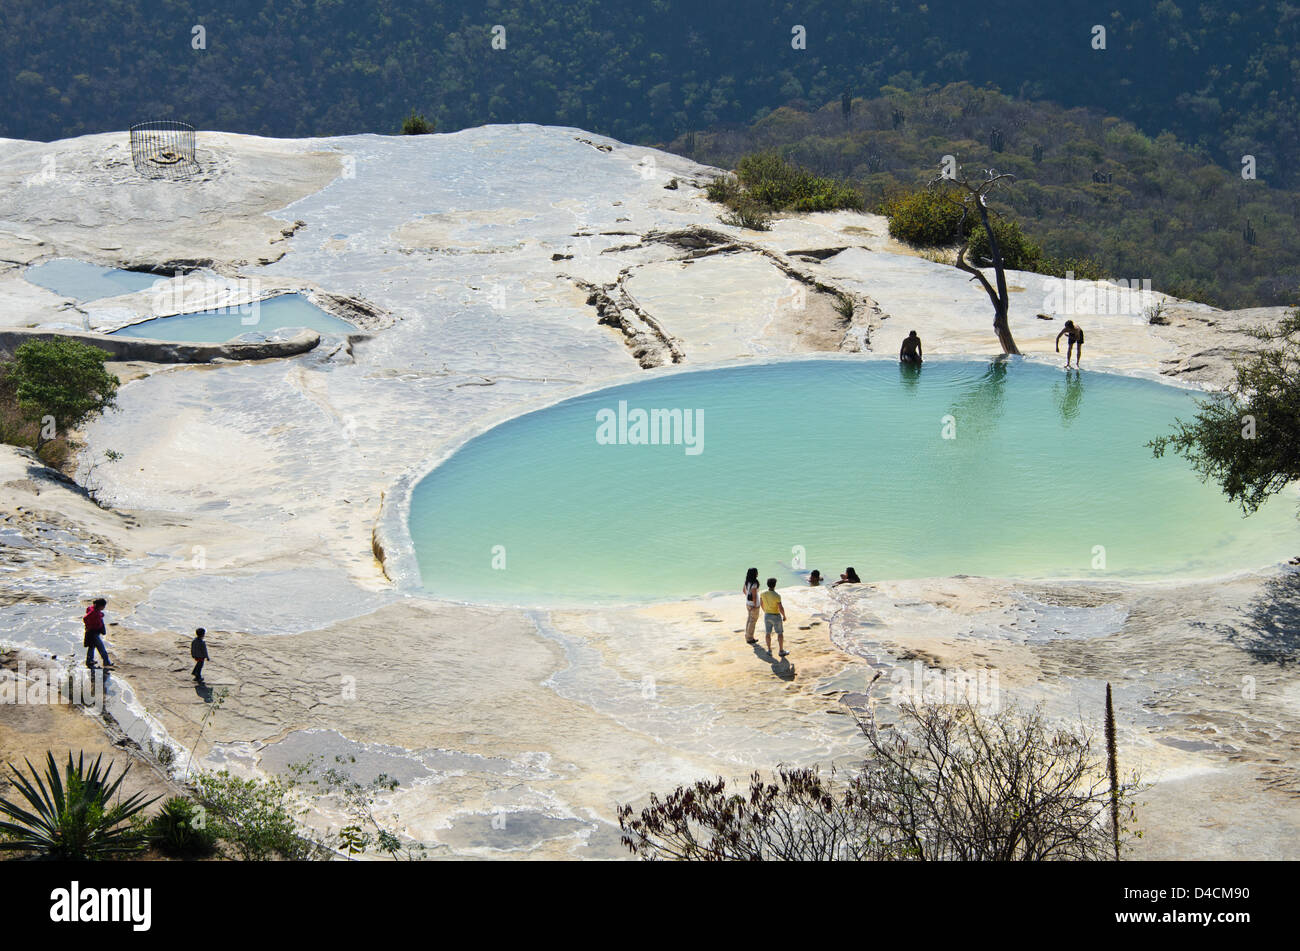 Bathing in the mineral springs at Hierve el Agua, Oaxaca, Mexico. Stock Photo